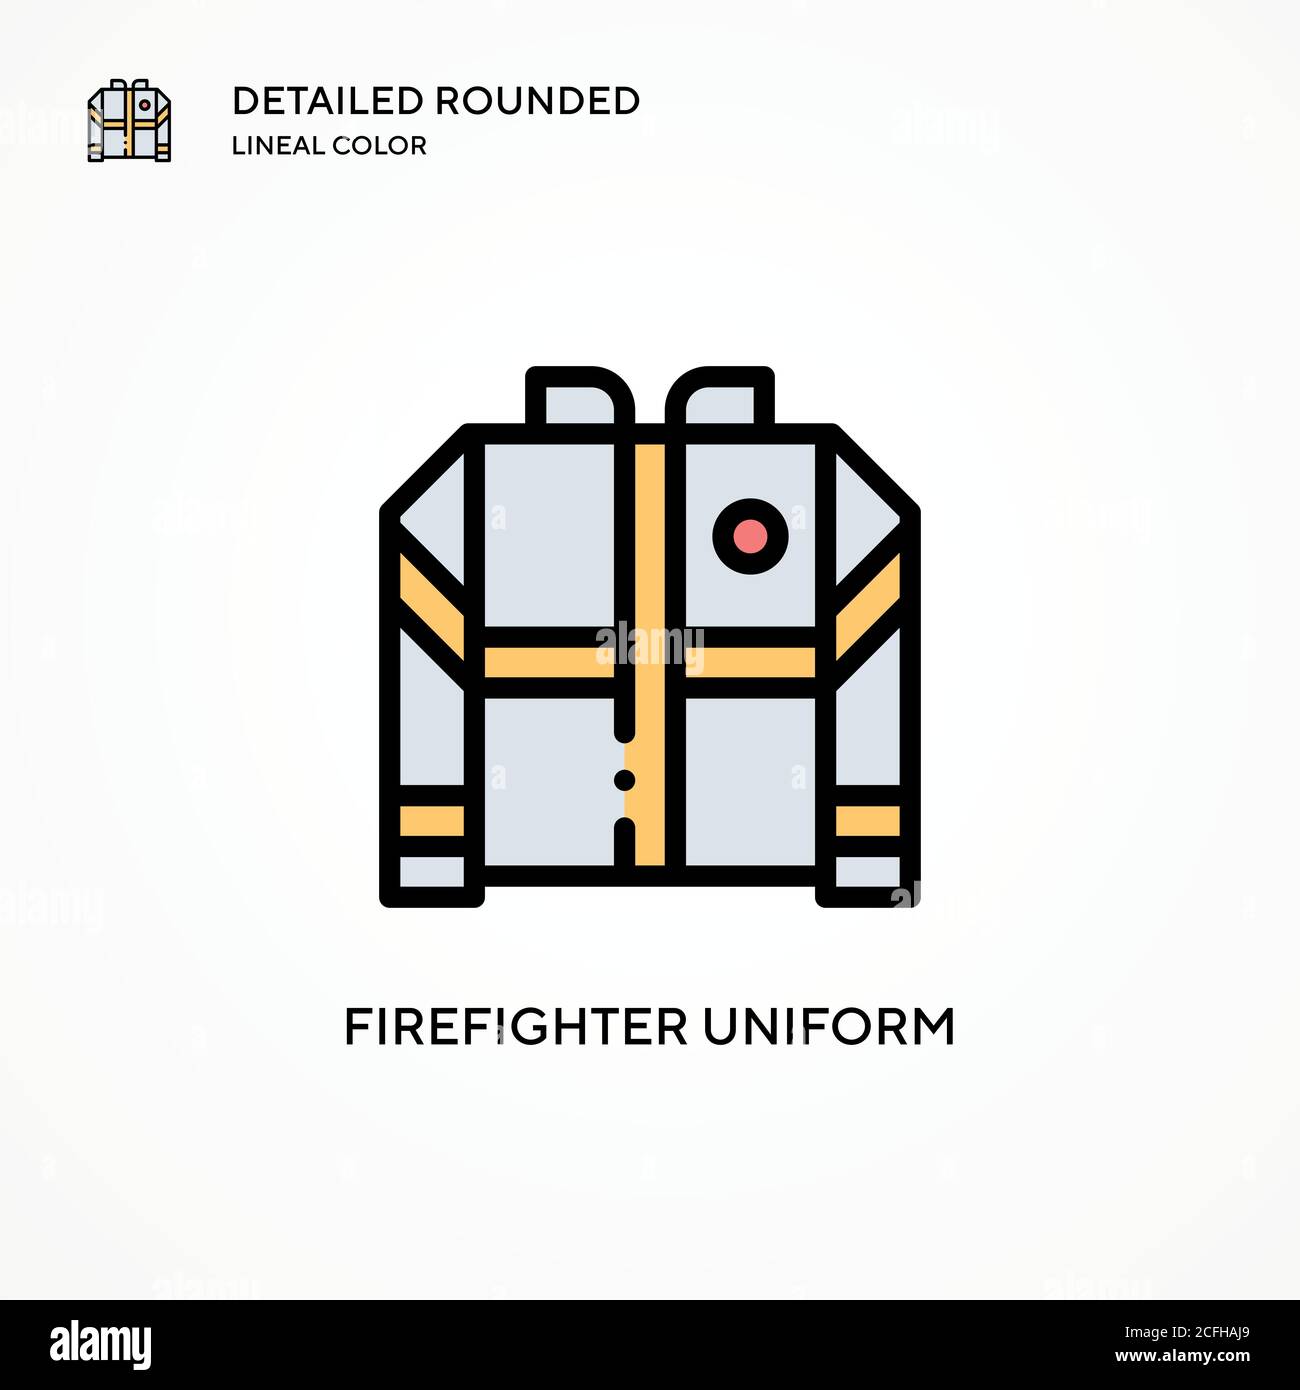 Firefighter uniform vector icon. Modern vector illustration concepts. Easy to edit and customize. Stock Vector